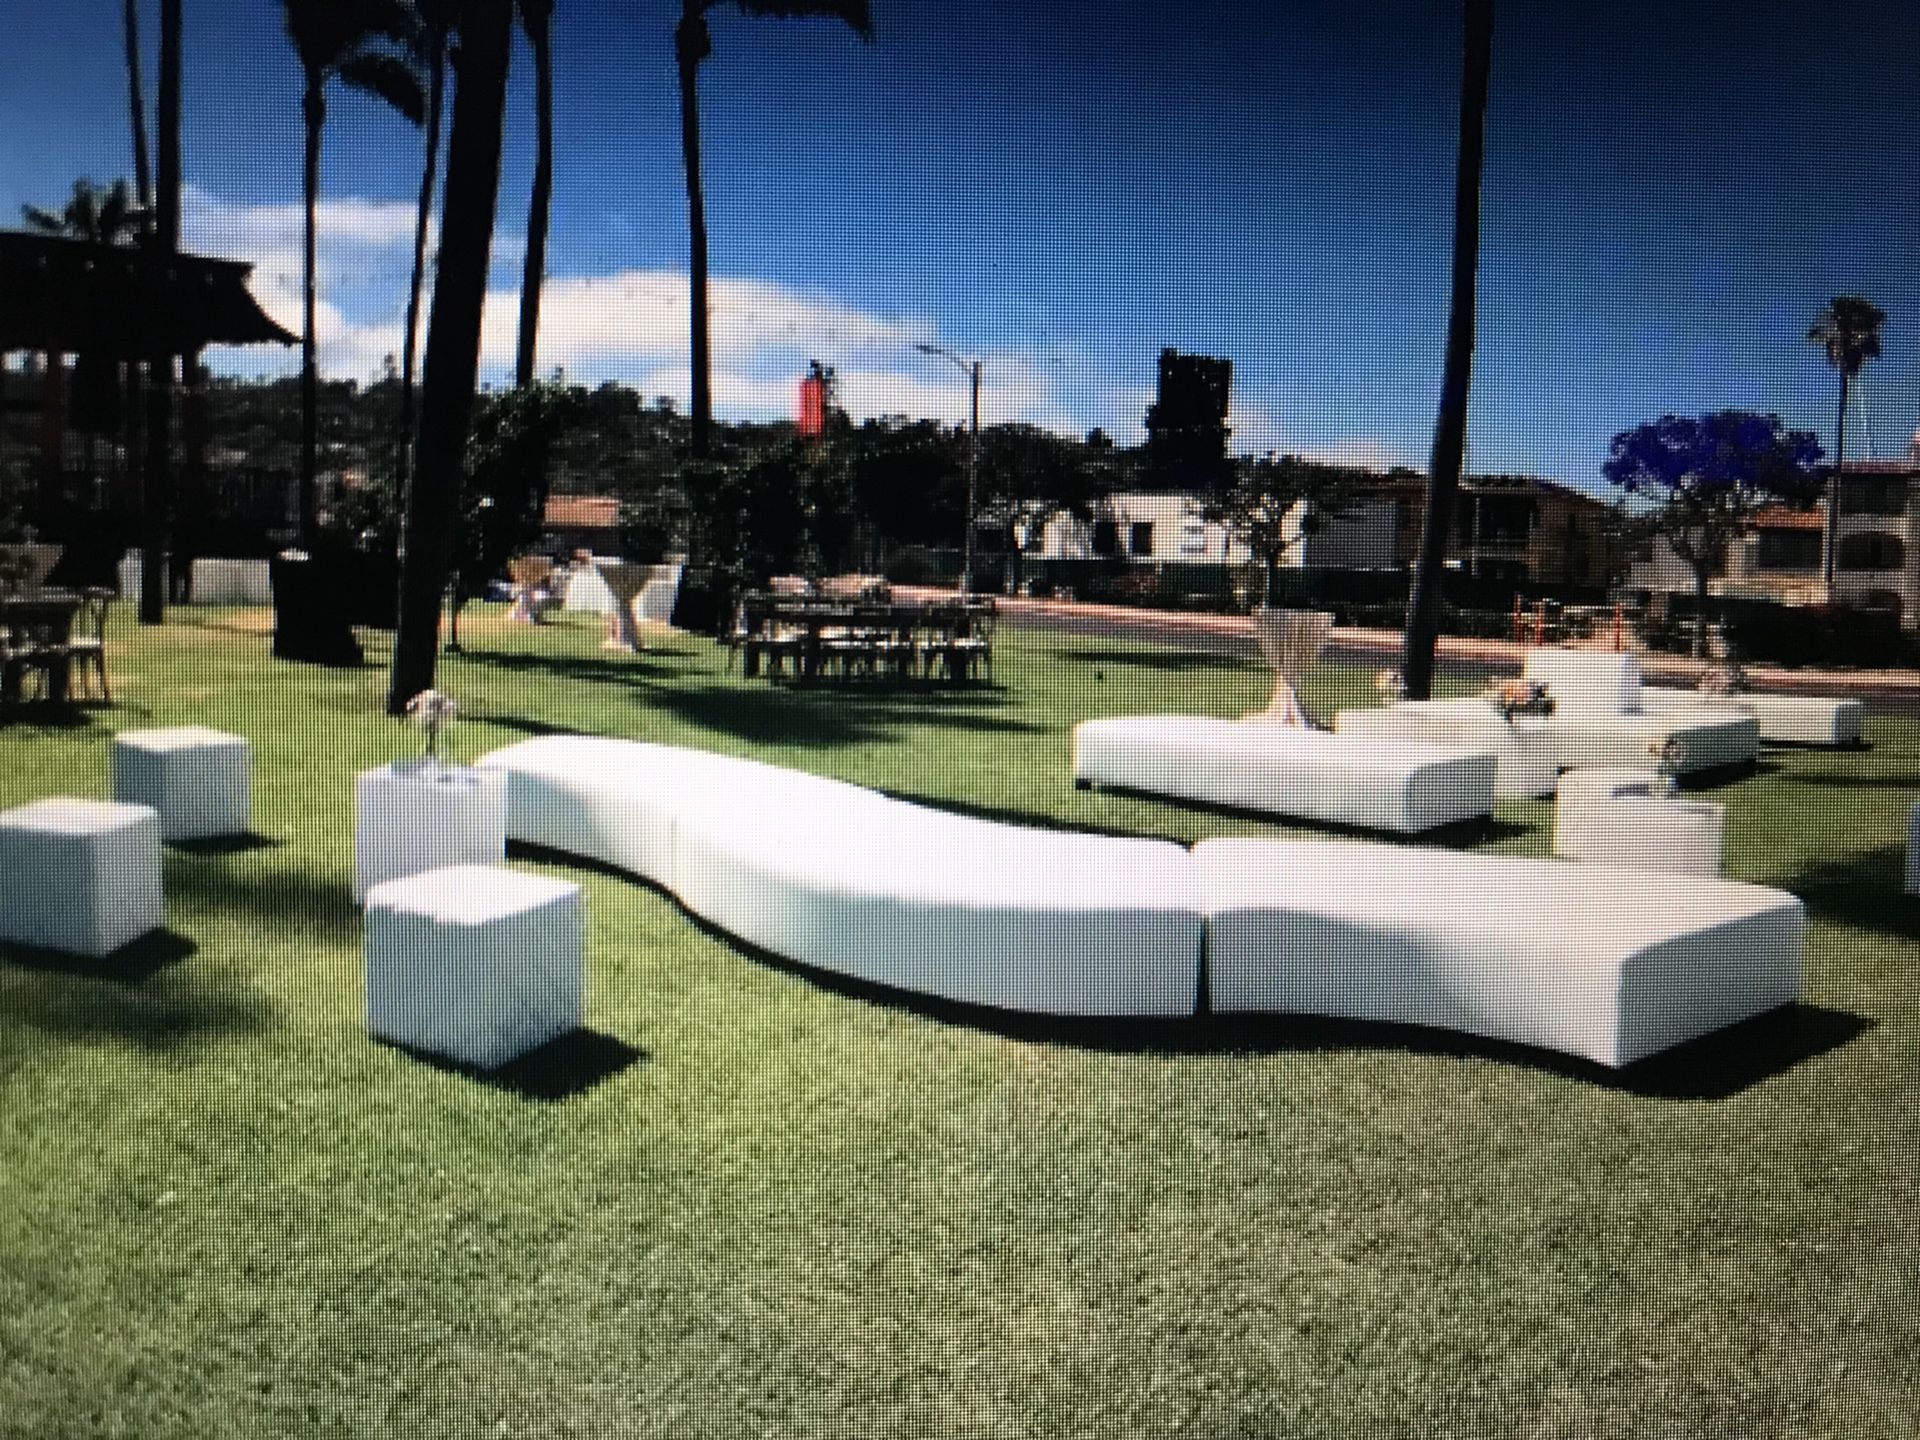 White outdoor event/ wedding furniture. Lots of options and in like new condition. Seats 80-100 people. Very modern and incredibly stunning.